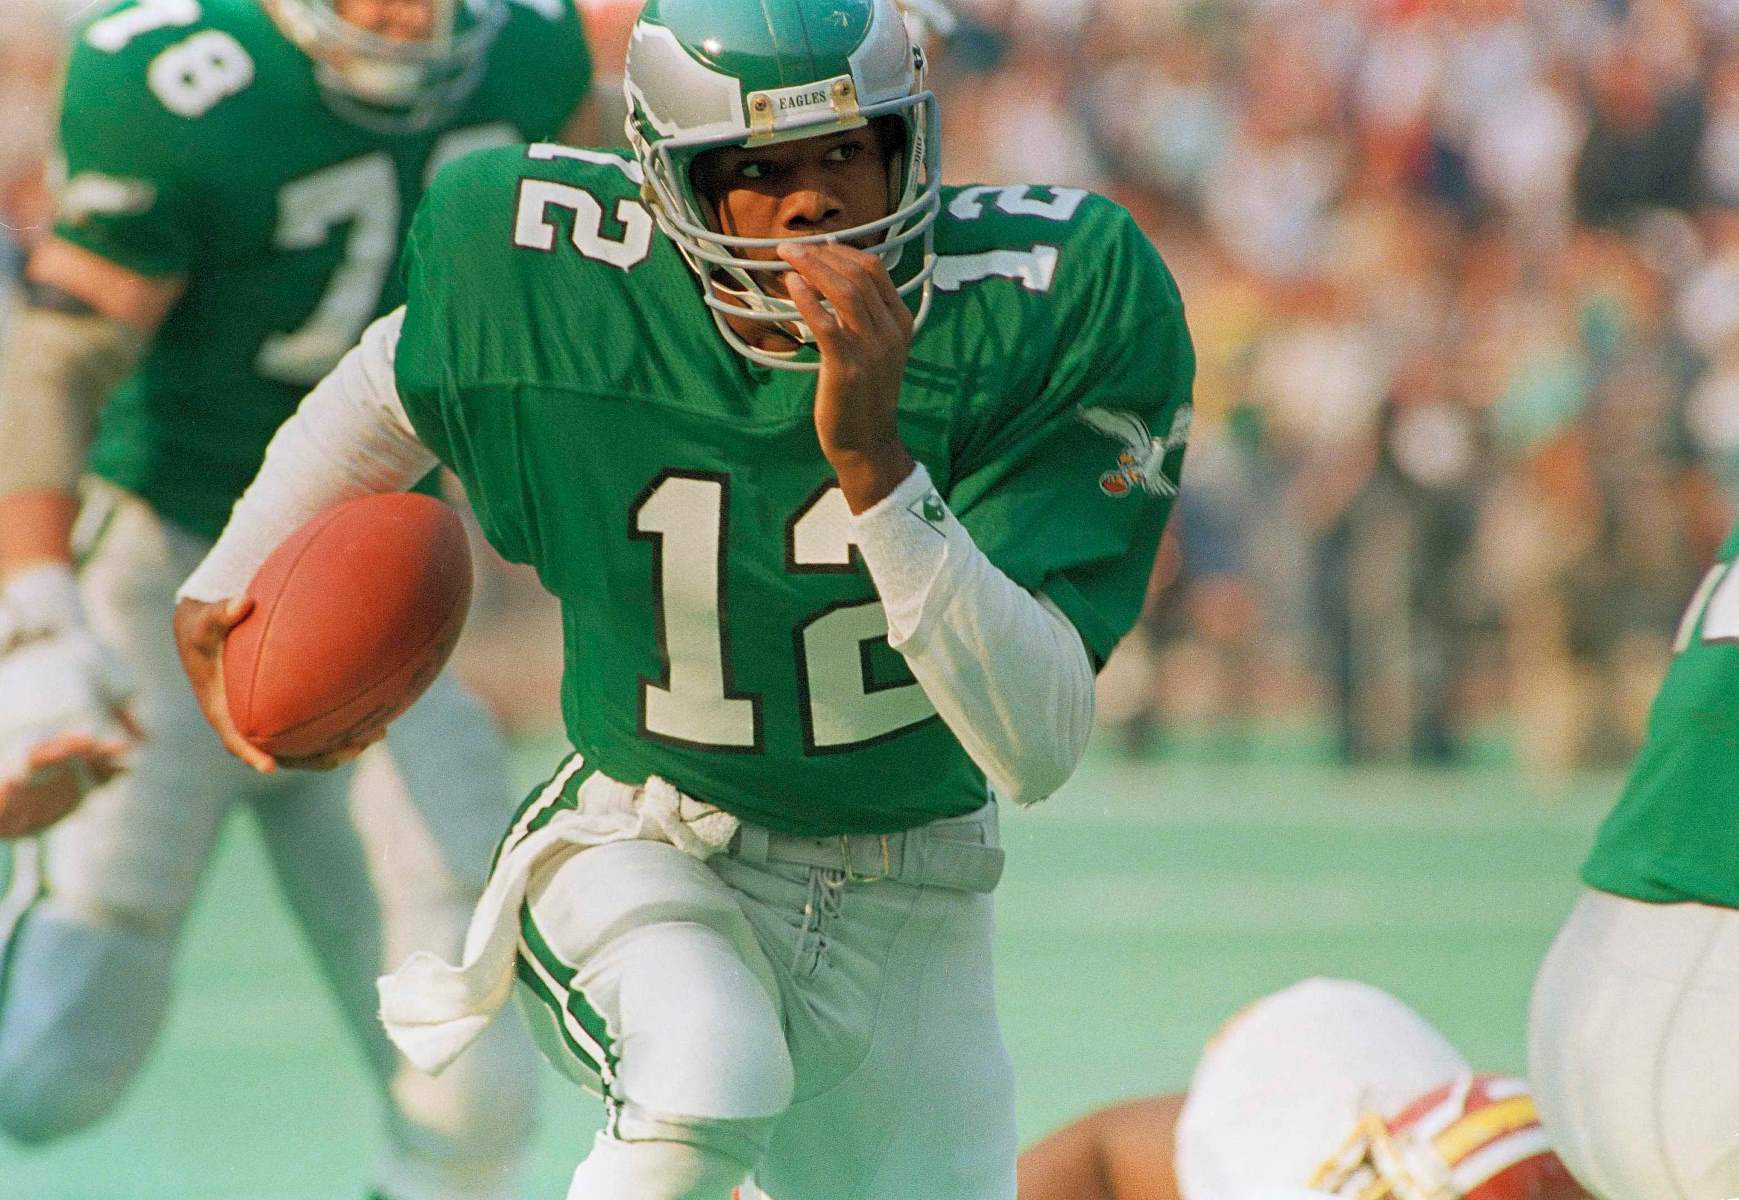 13-intriguing-facts-about-randall-cunningham